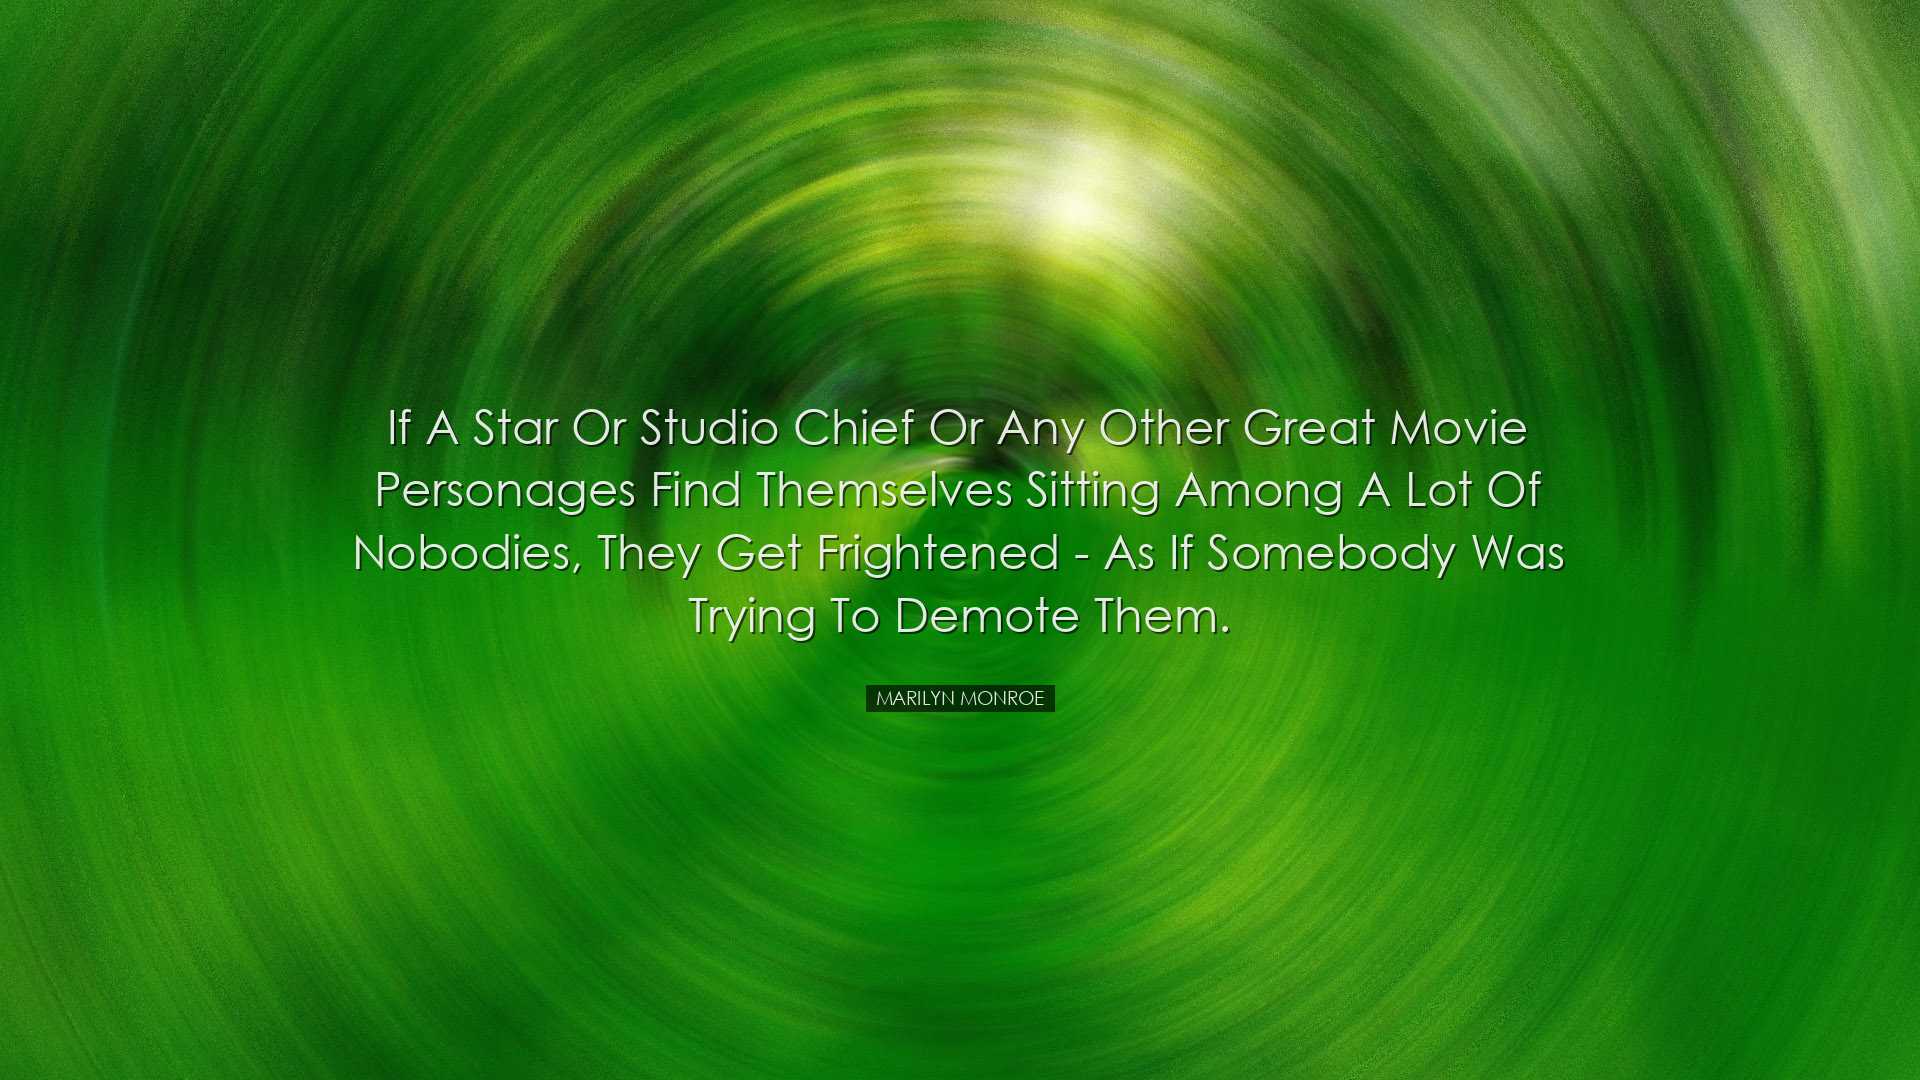 If a star or studio chief or any other great movie personages find